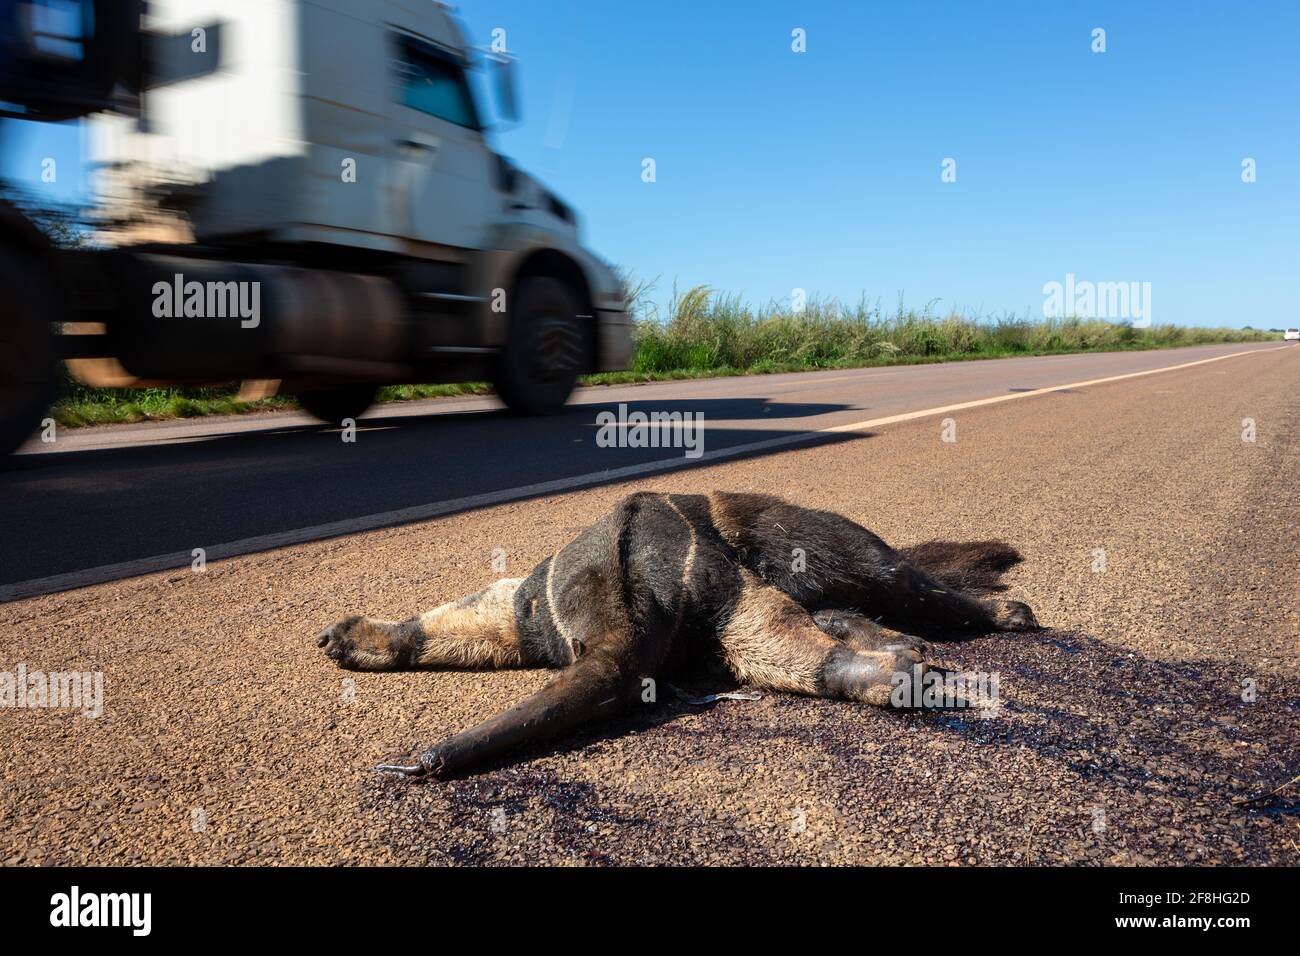 Dead giant anteater, Myrmecophaga tridactyla, run over, killed by vehicle on the road. Wild animal roadkill in the amazon rainforest, Brazil. Stock Photo